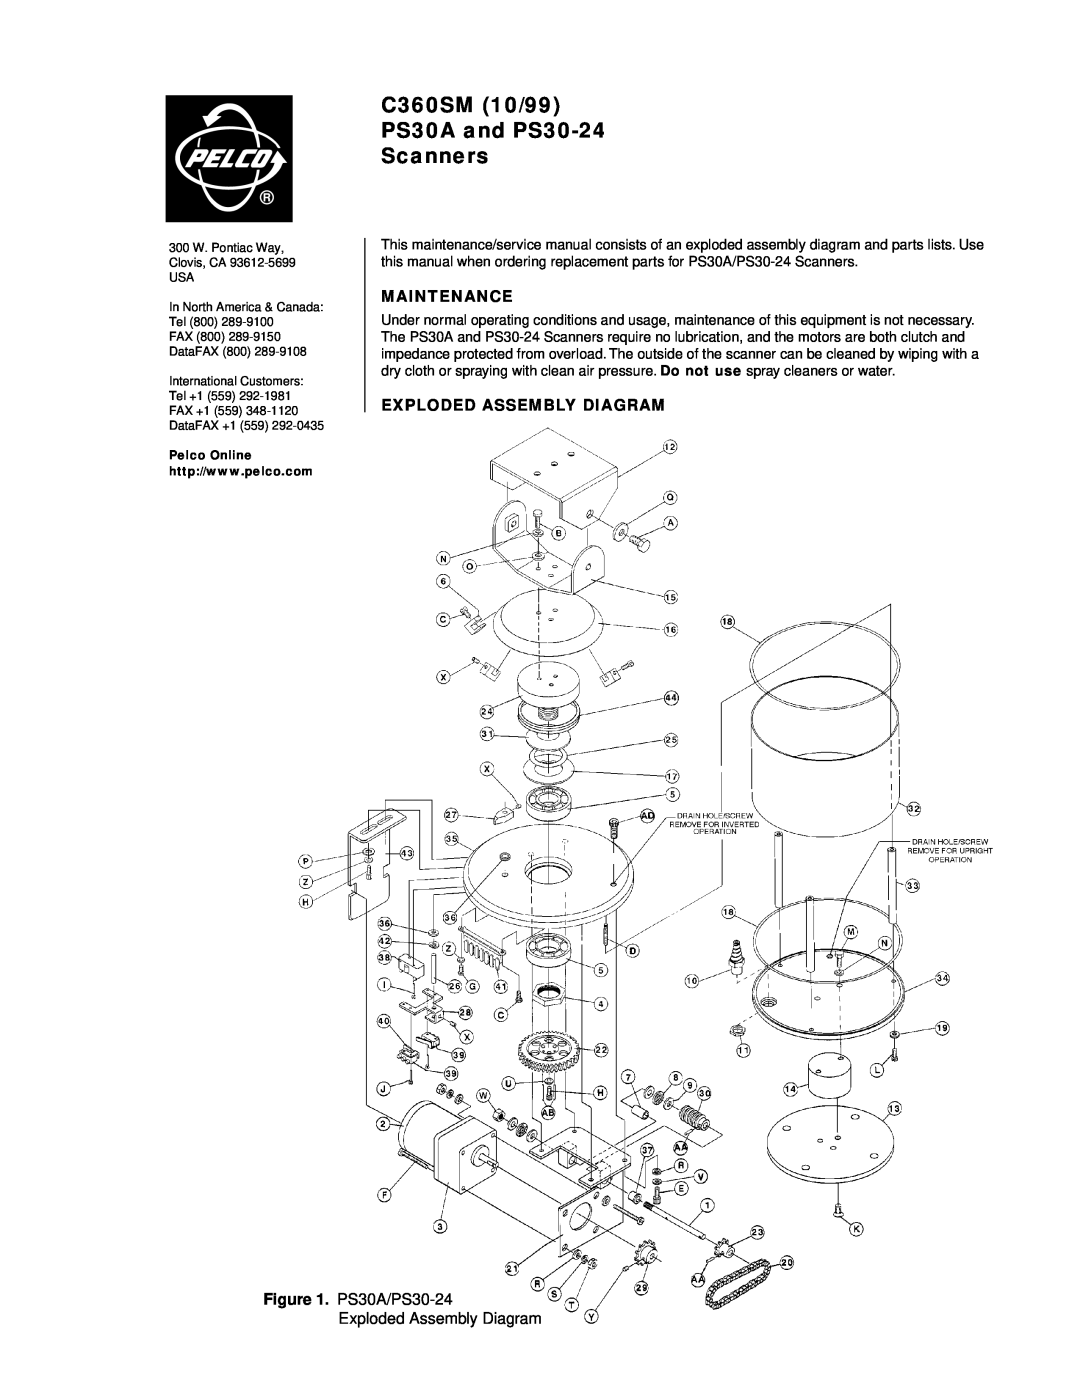 Pelco service manual Maintenance, PS30A/PS30-24Exploded Assembly Diagram, C360SM 10/99 PS30A and PS30-24 Scanners 